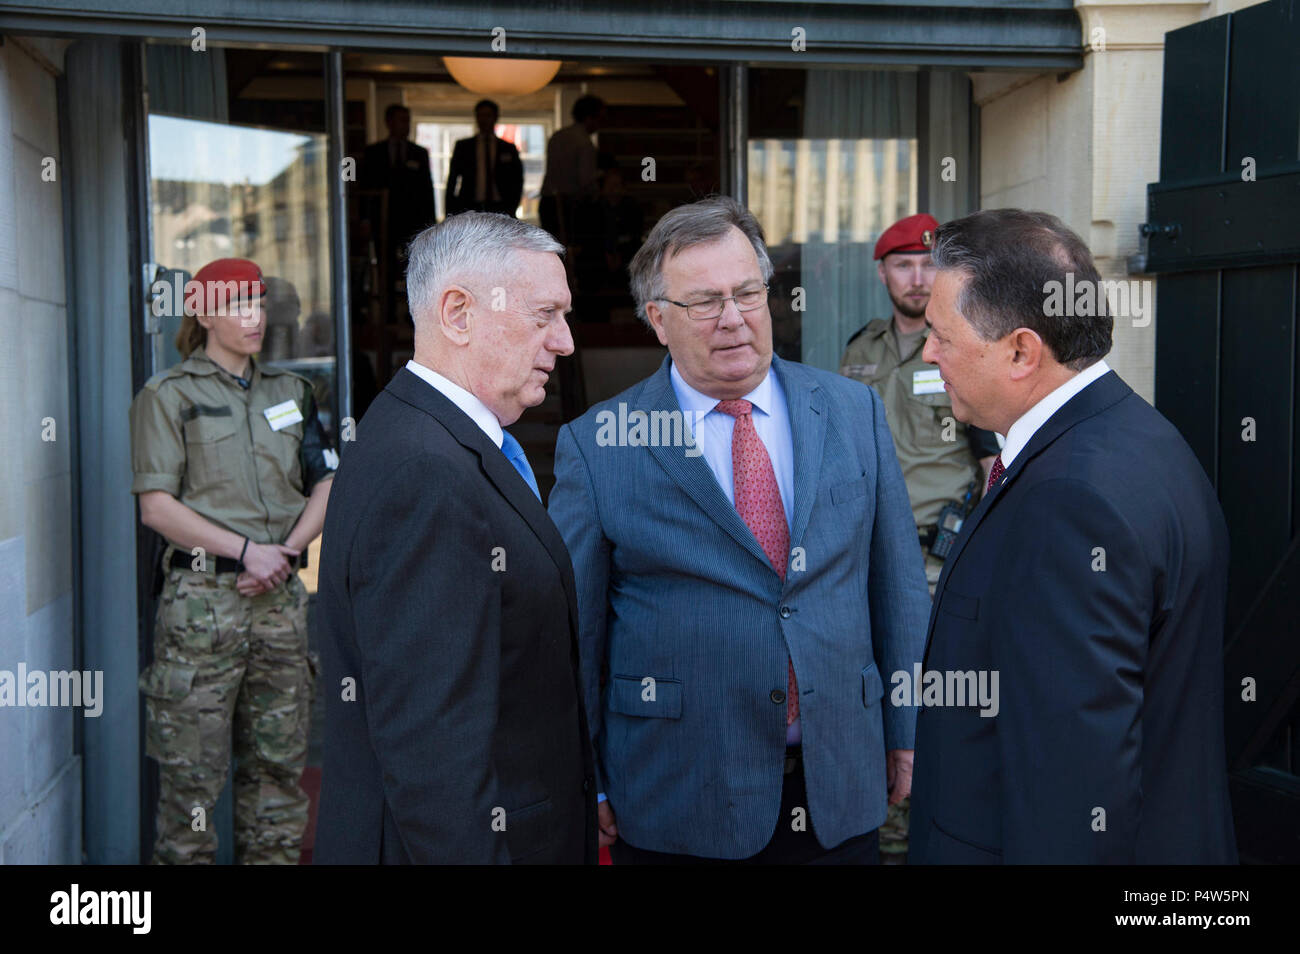 Secretary of Defense Jim Mattis and Danish Minister of Defence Claus Hjort Frederiksen welcome Basat Öztürk, the deputy undersecretary at the Turkish Ministry of National Defence, to a Global Coalition on the Defeat of ISIS meeting at Eigtveds Pakhus in Copenhagen, Denmark, May 9, 2017. (DOD Stock Photo